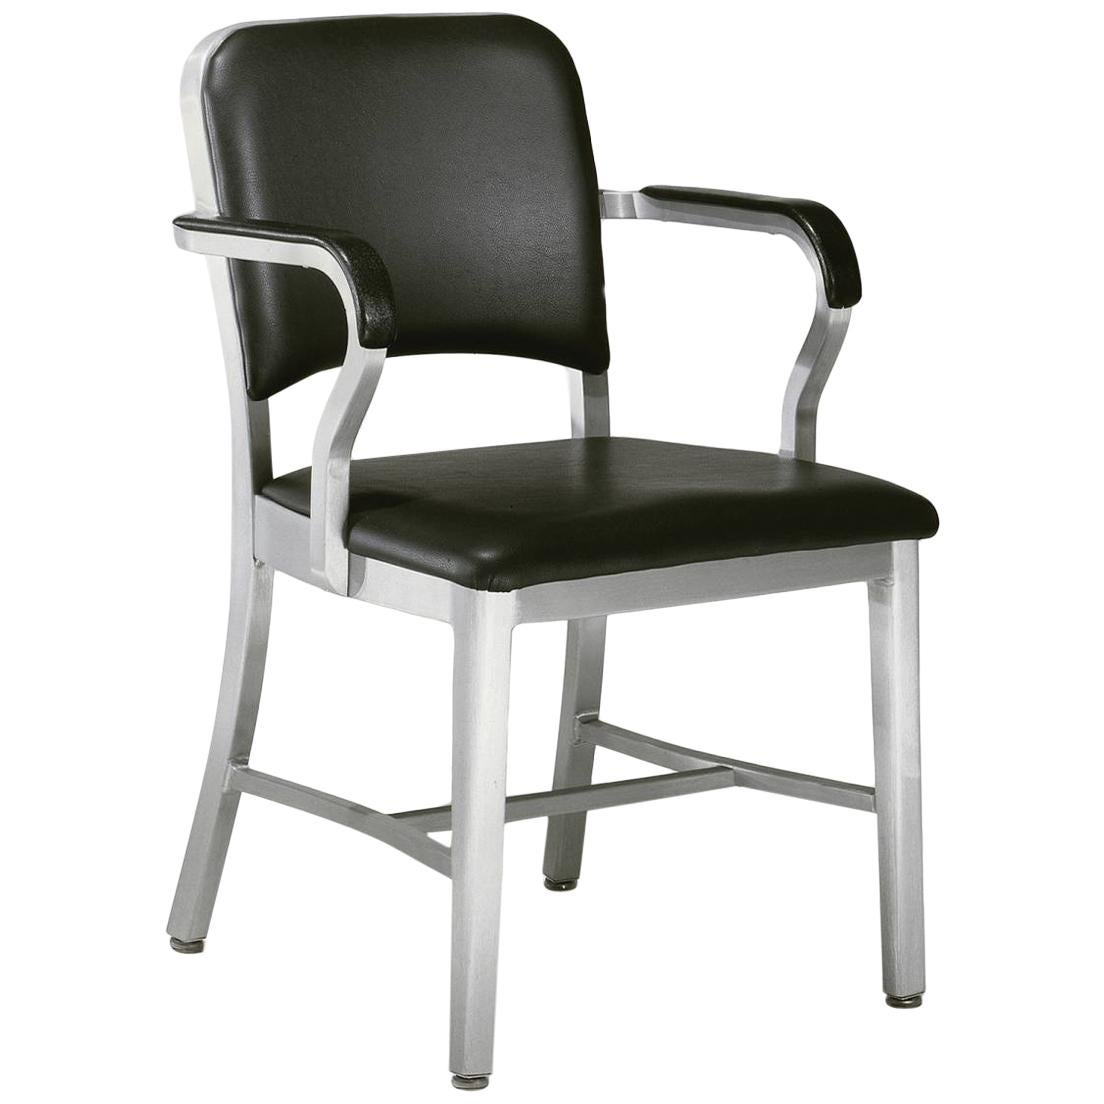 Emeco Navy Armchair in Brushed Aluminum and Black Upholstery by US Navy